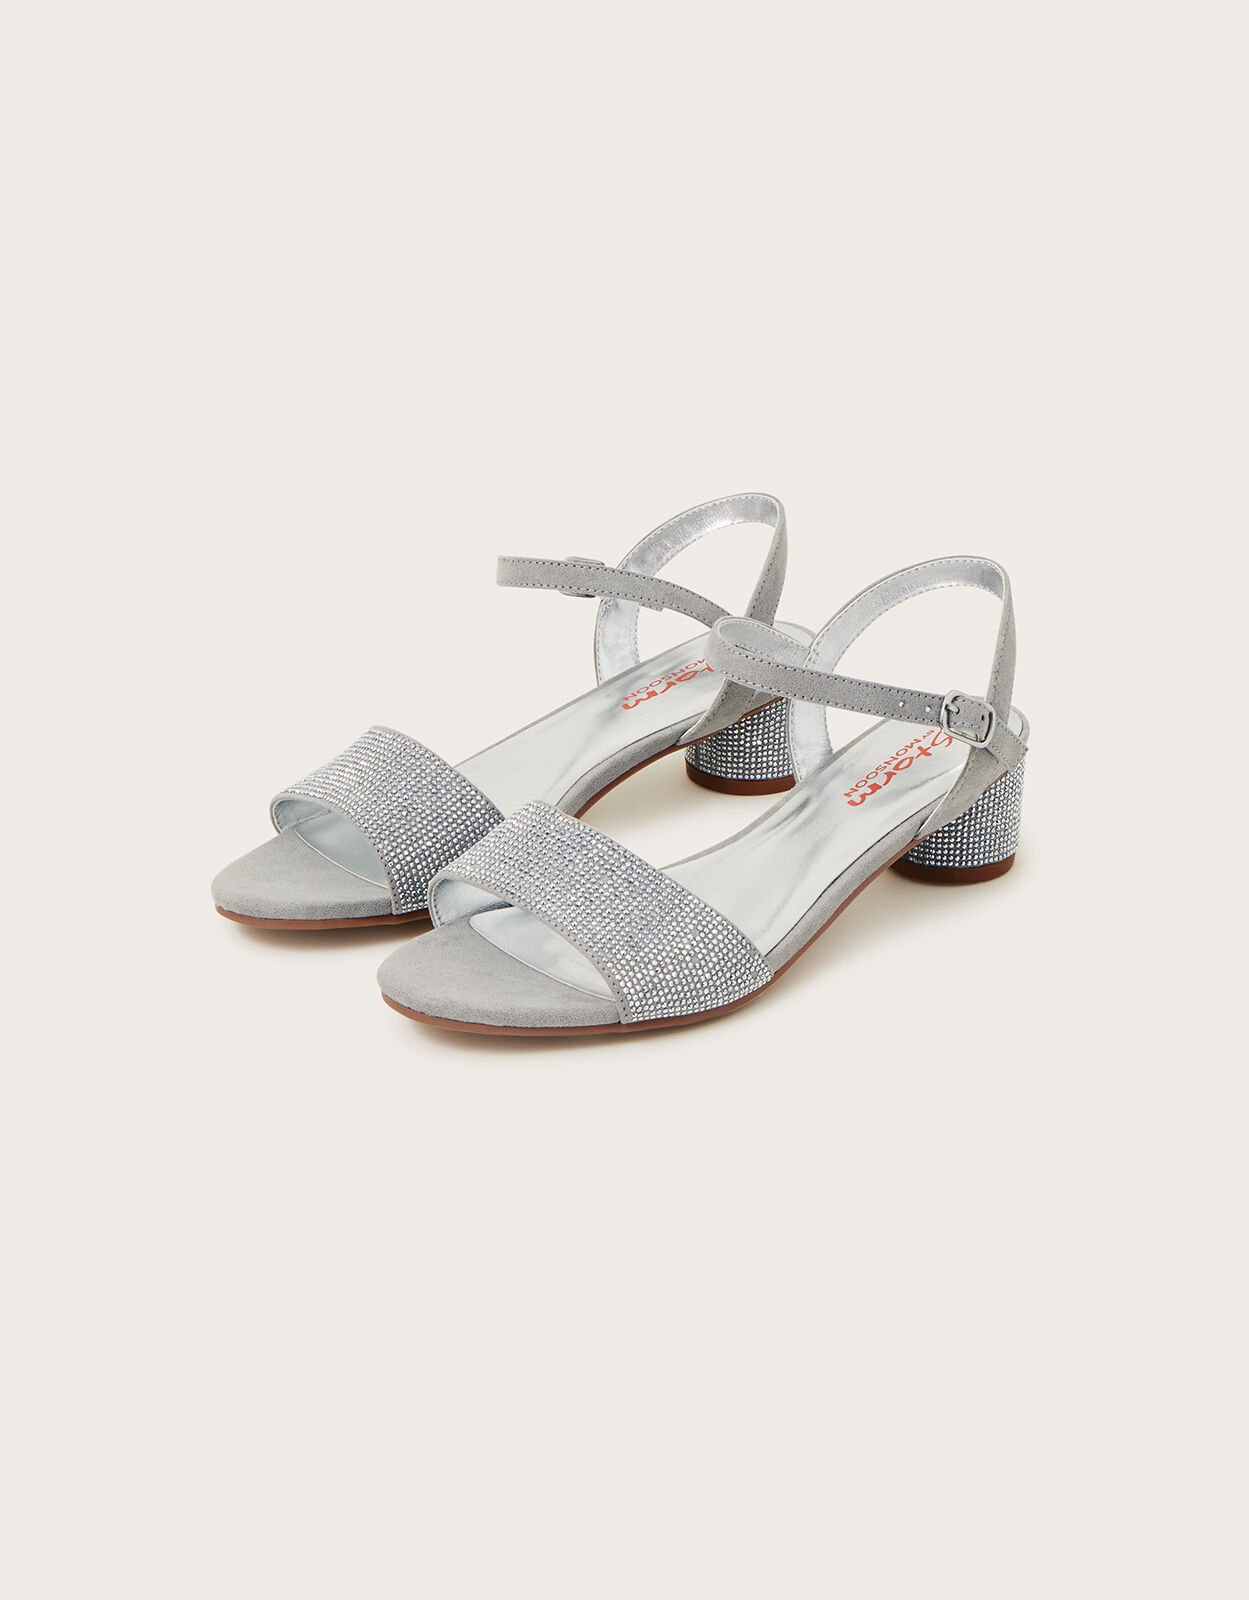 Silver Eleanor Sandal with a Short Heel 4380